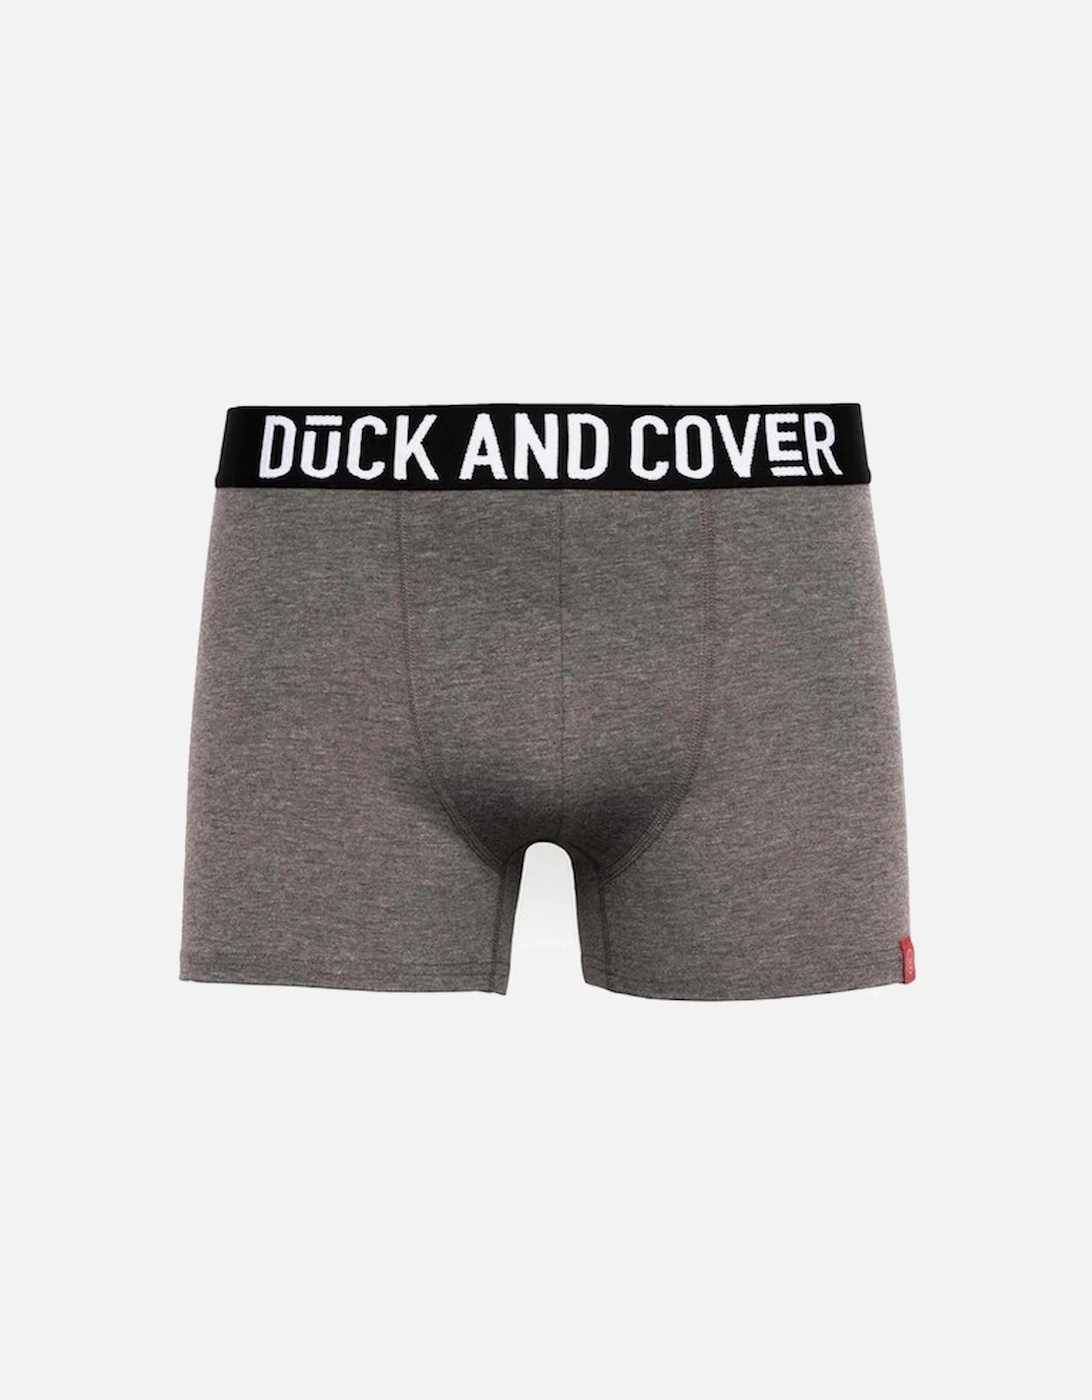 Duck and Cover Mens Darton Marl Boxer Shorts (Pack of 2)